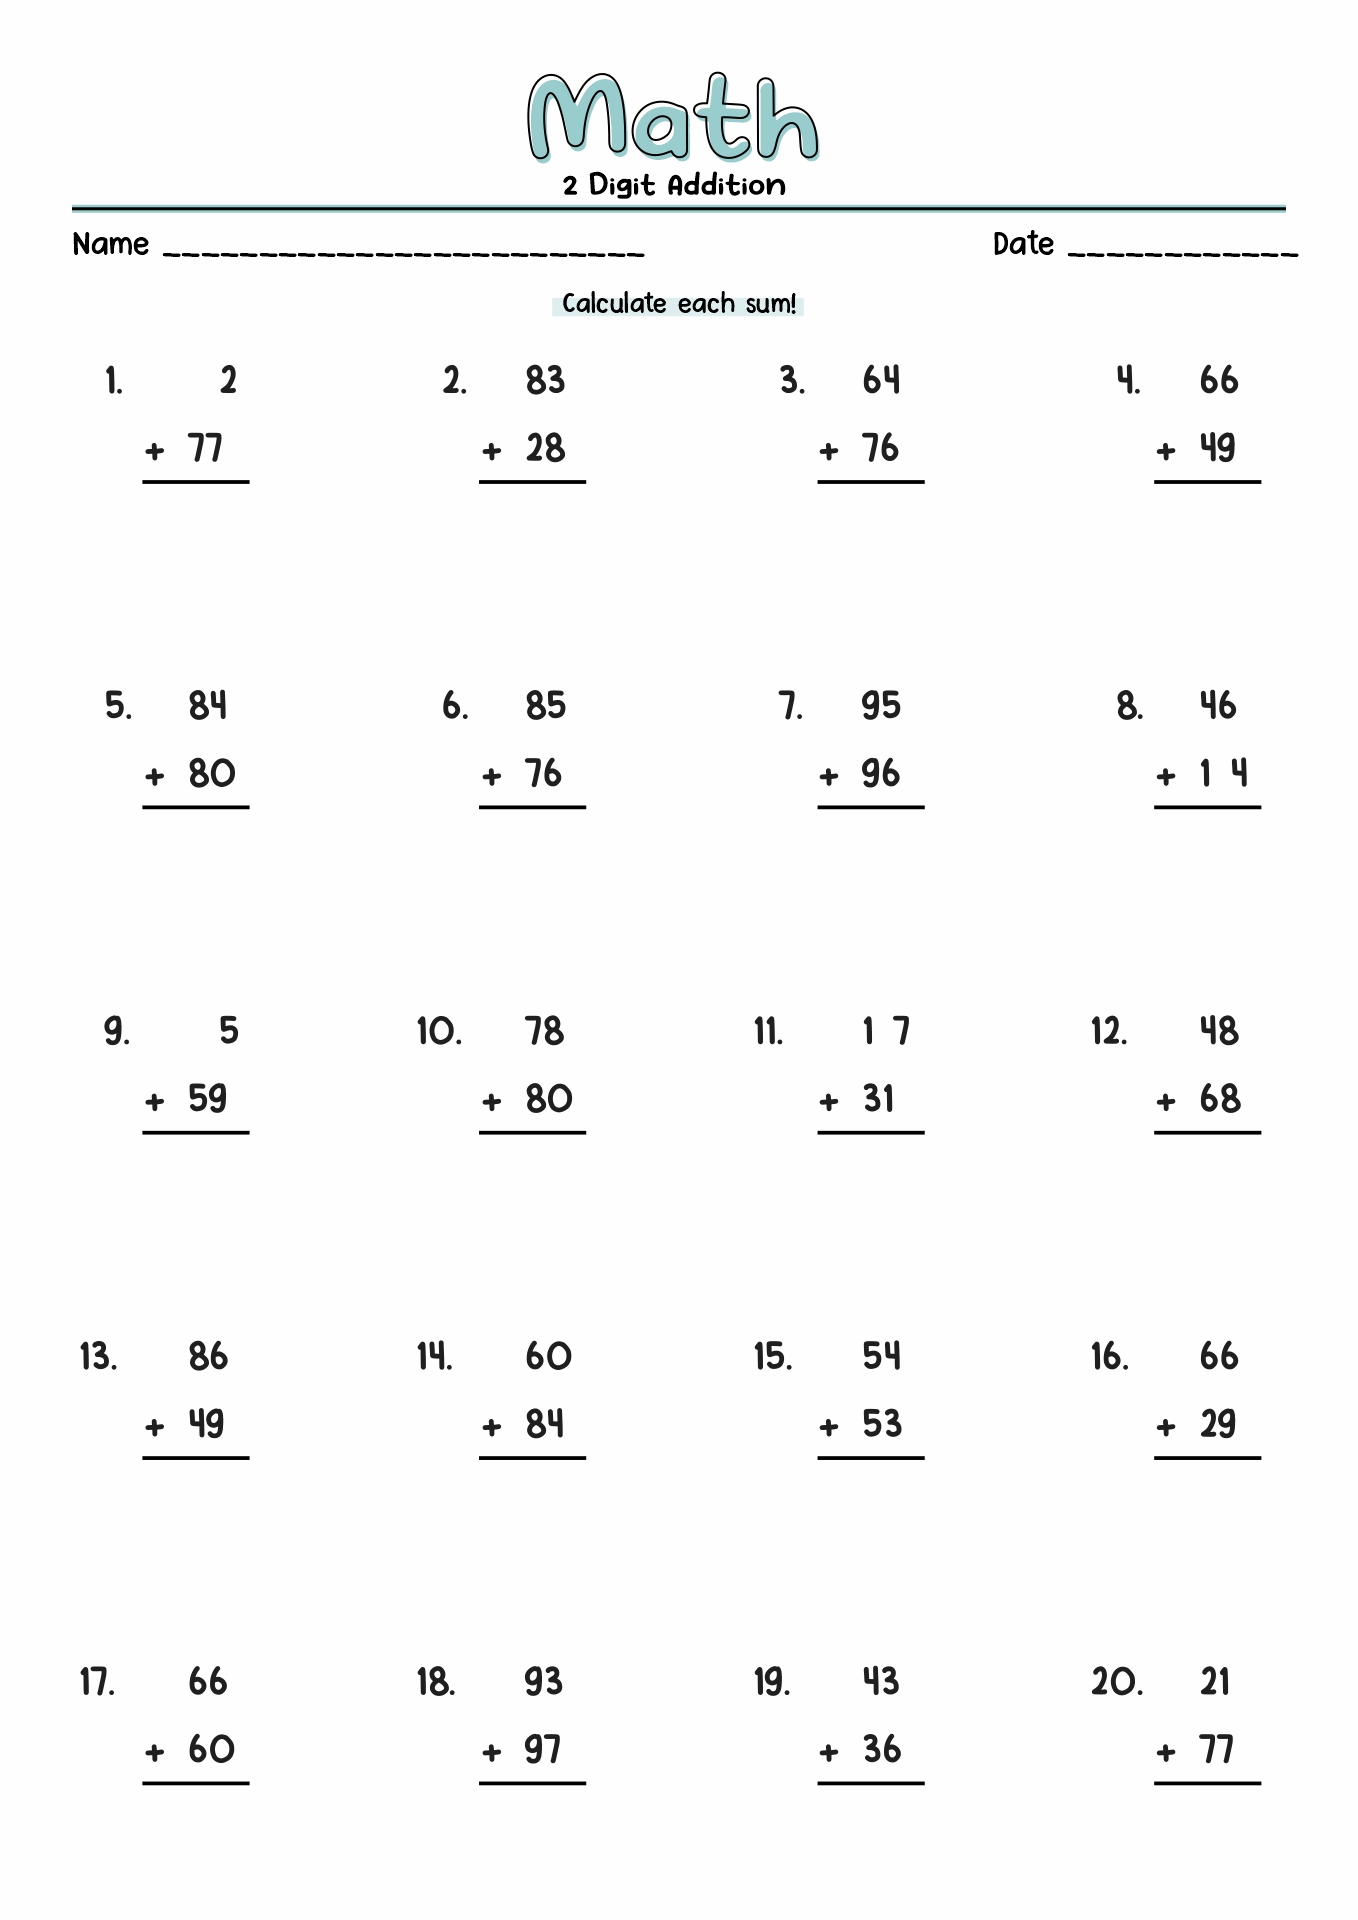 ordering-2-digit-1-digit-numbers-smallest-to-largest-differentiated-worksheet-rec-year-1